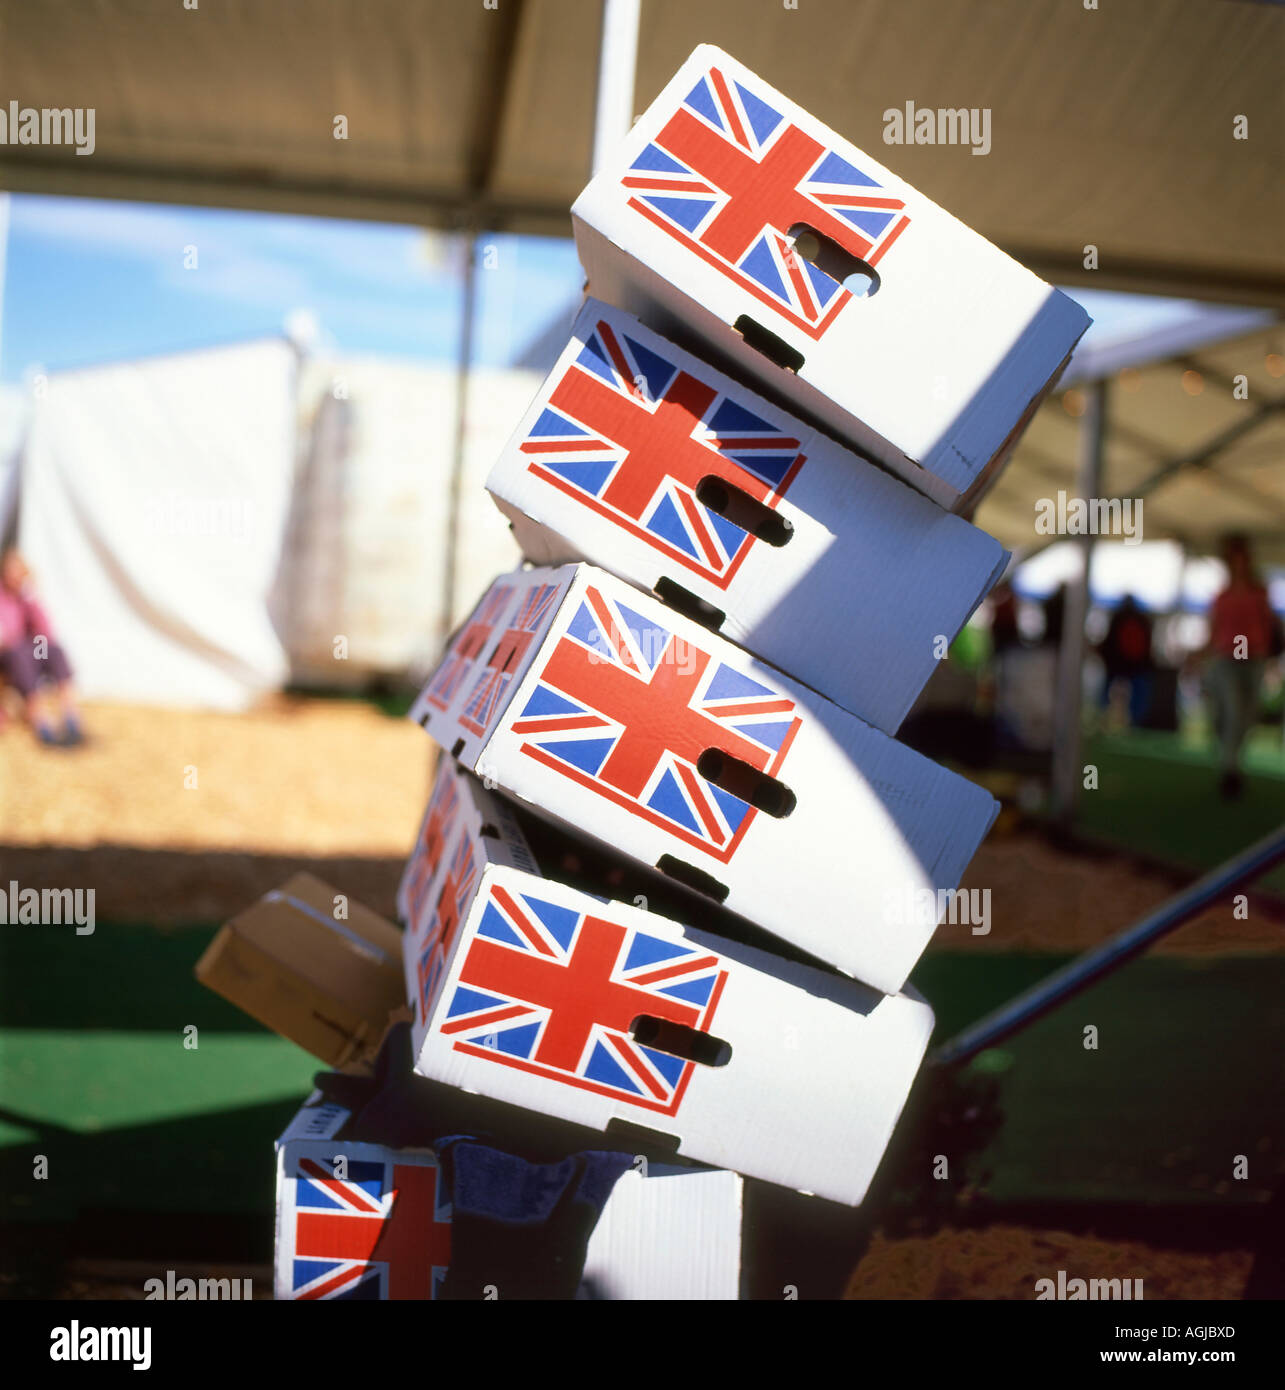 Union Jack flag label on unstable precariously stacked supermarket fresh food packing boxes about to topple Great Britain UK KATHY DEWITT Stock Photo